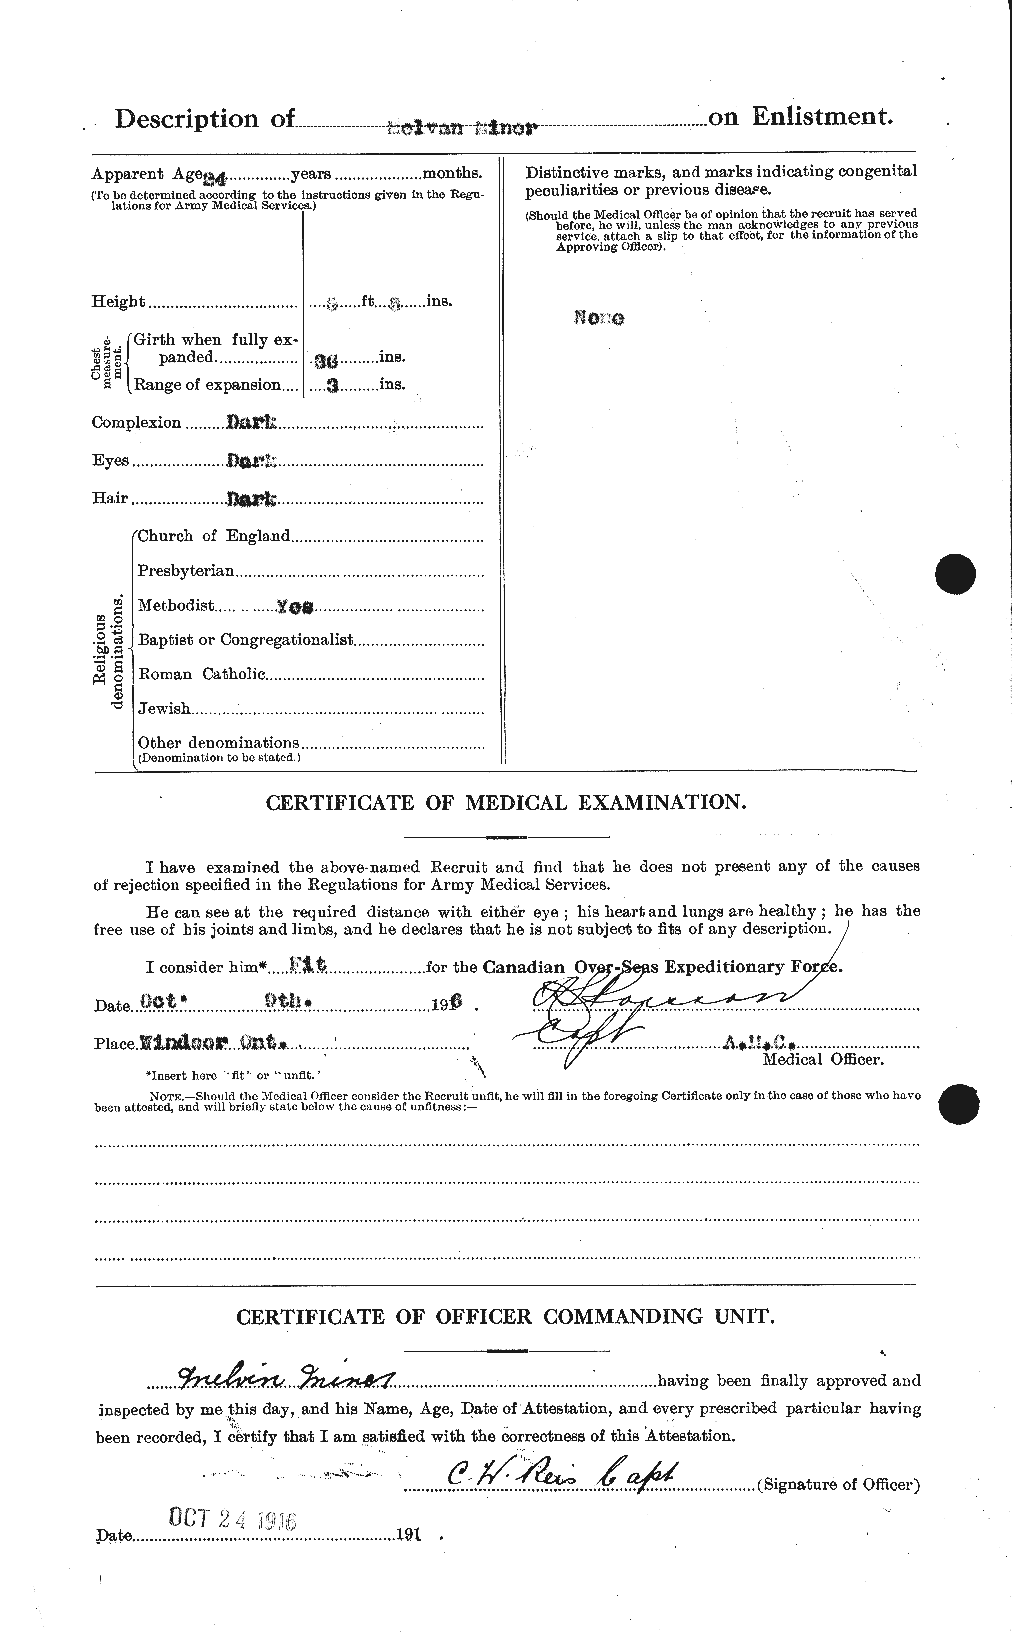 Personnel Records of the First World War - CEF 500807b